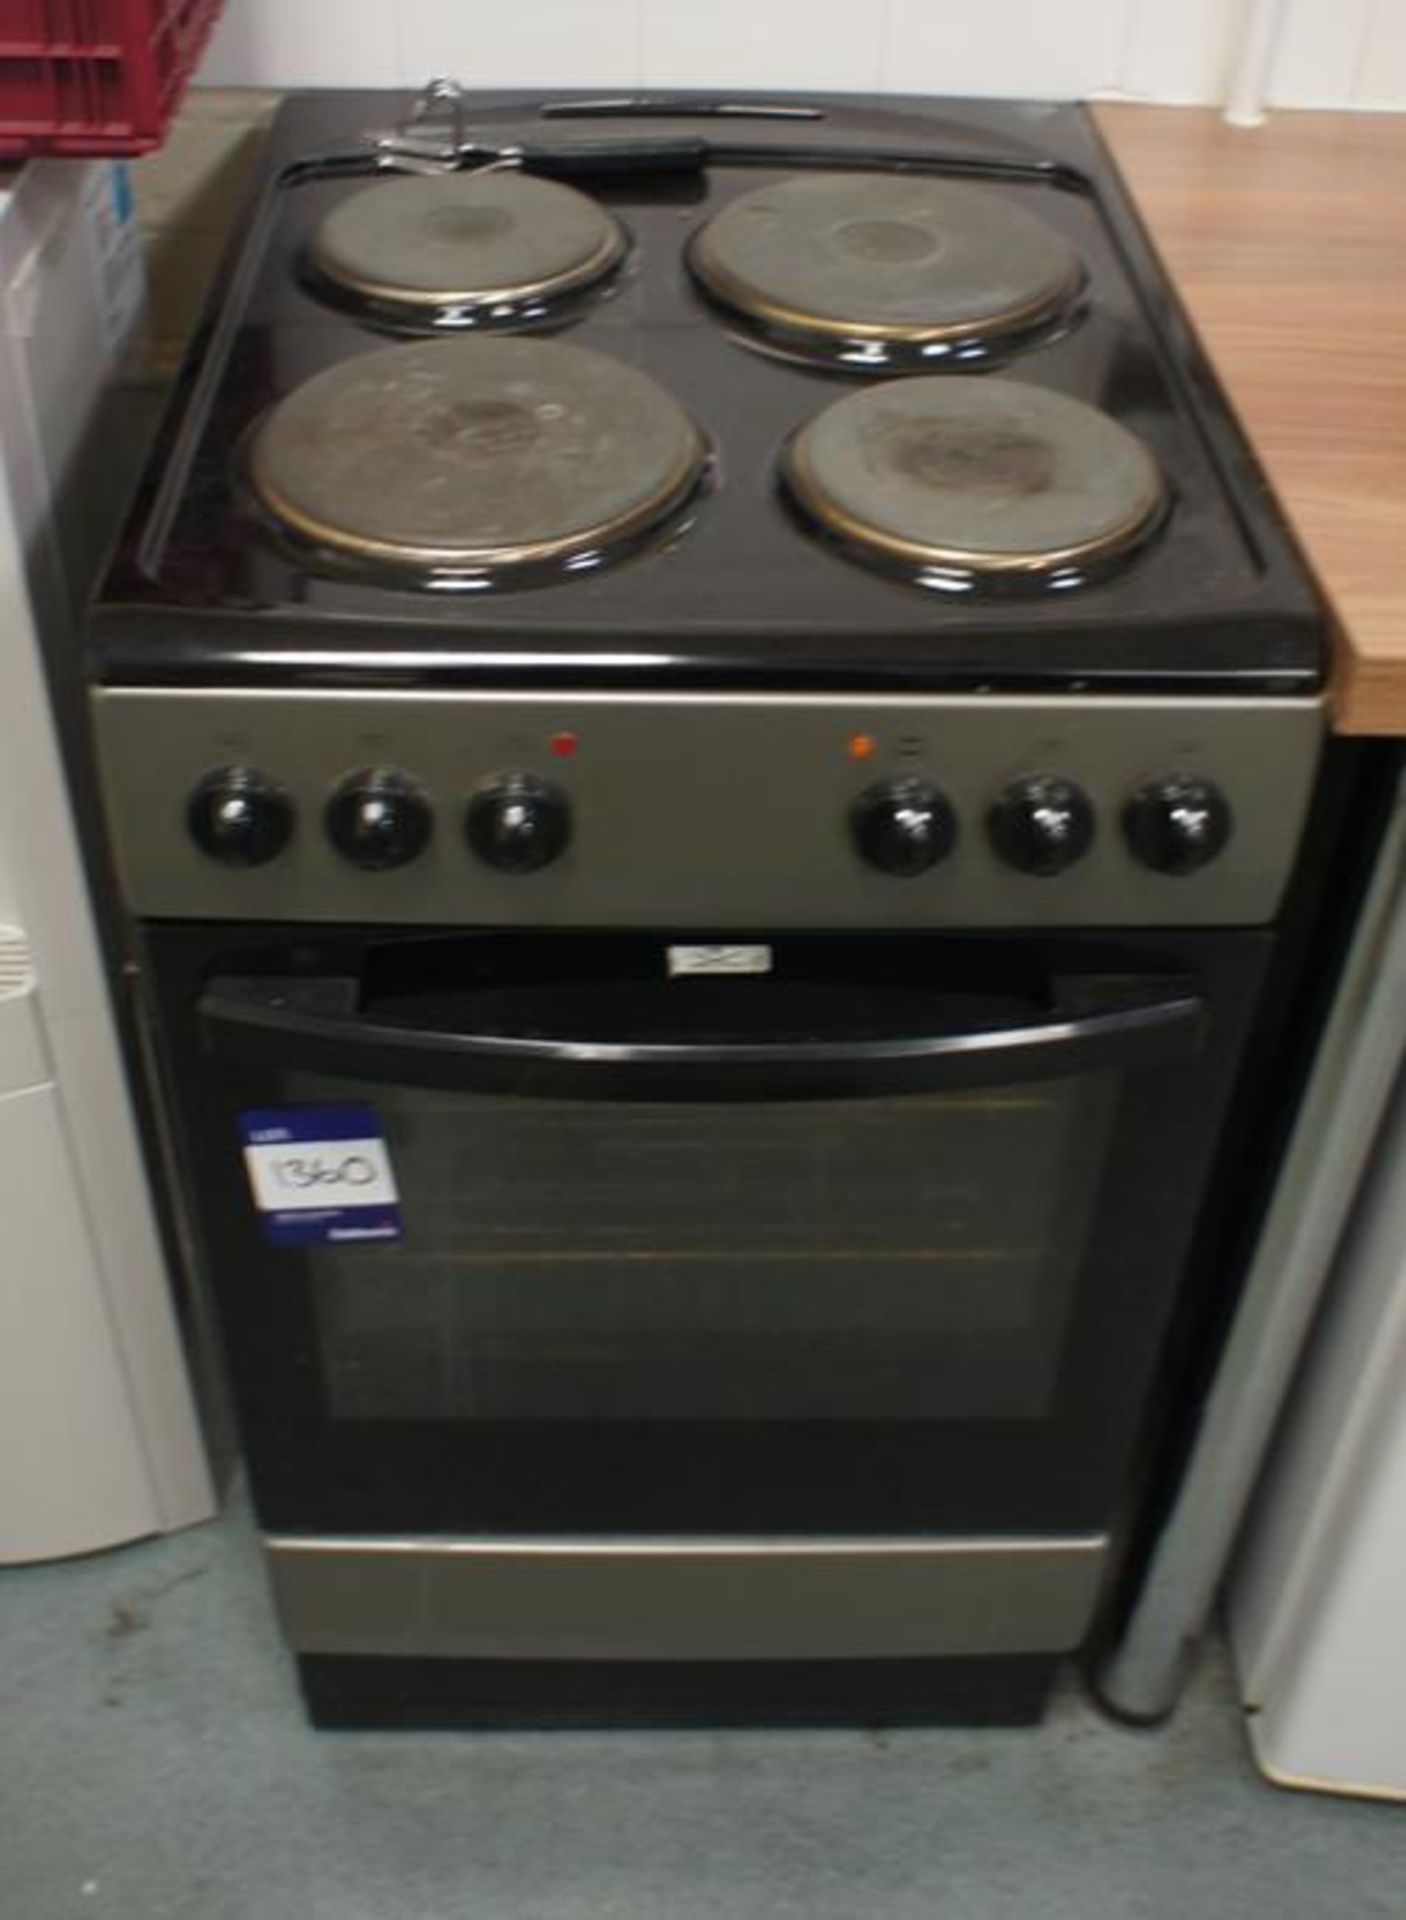 * CFSESV14 Freestanding Electric Oven with Hob Photographs are provided for example purposes only